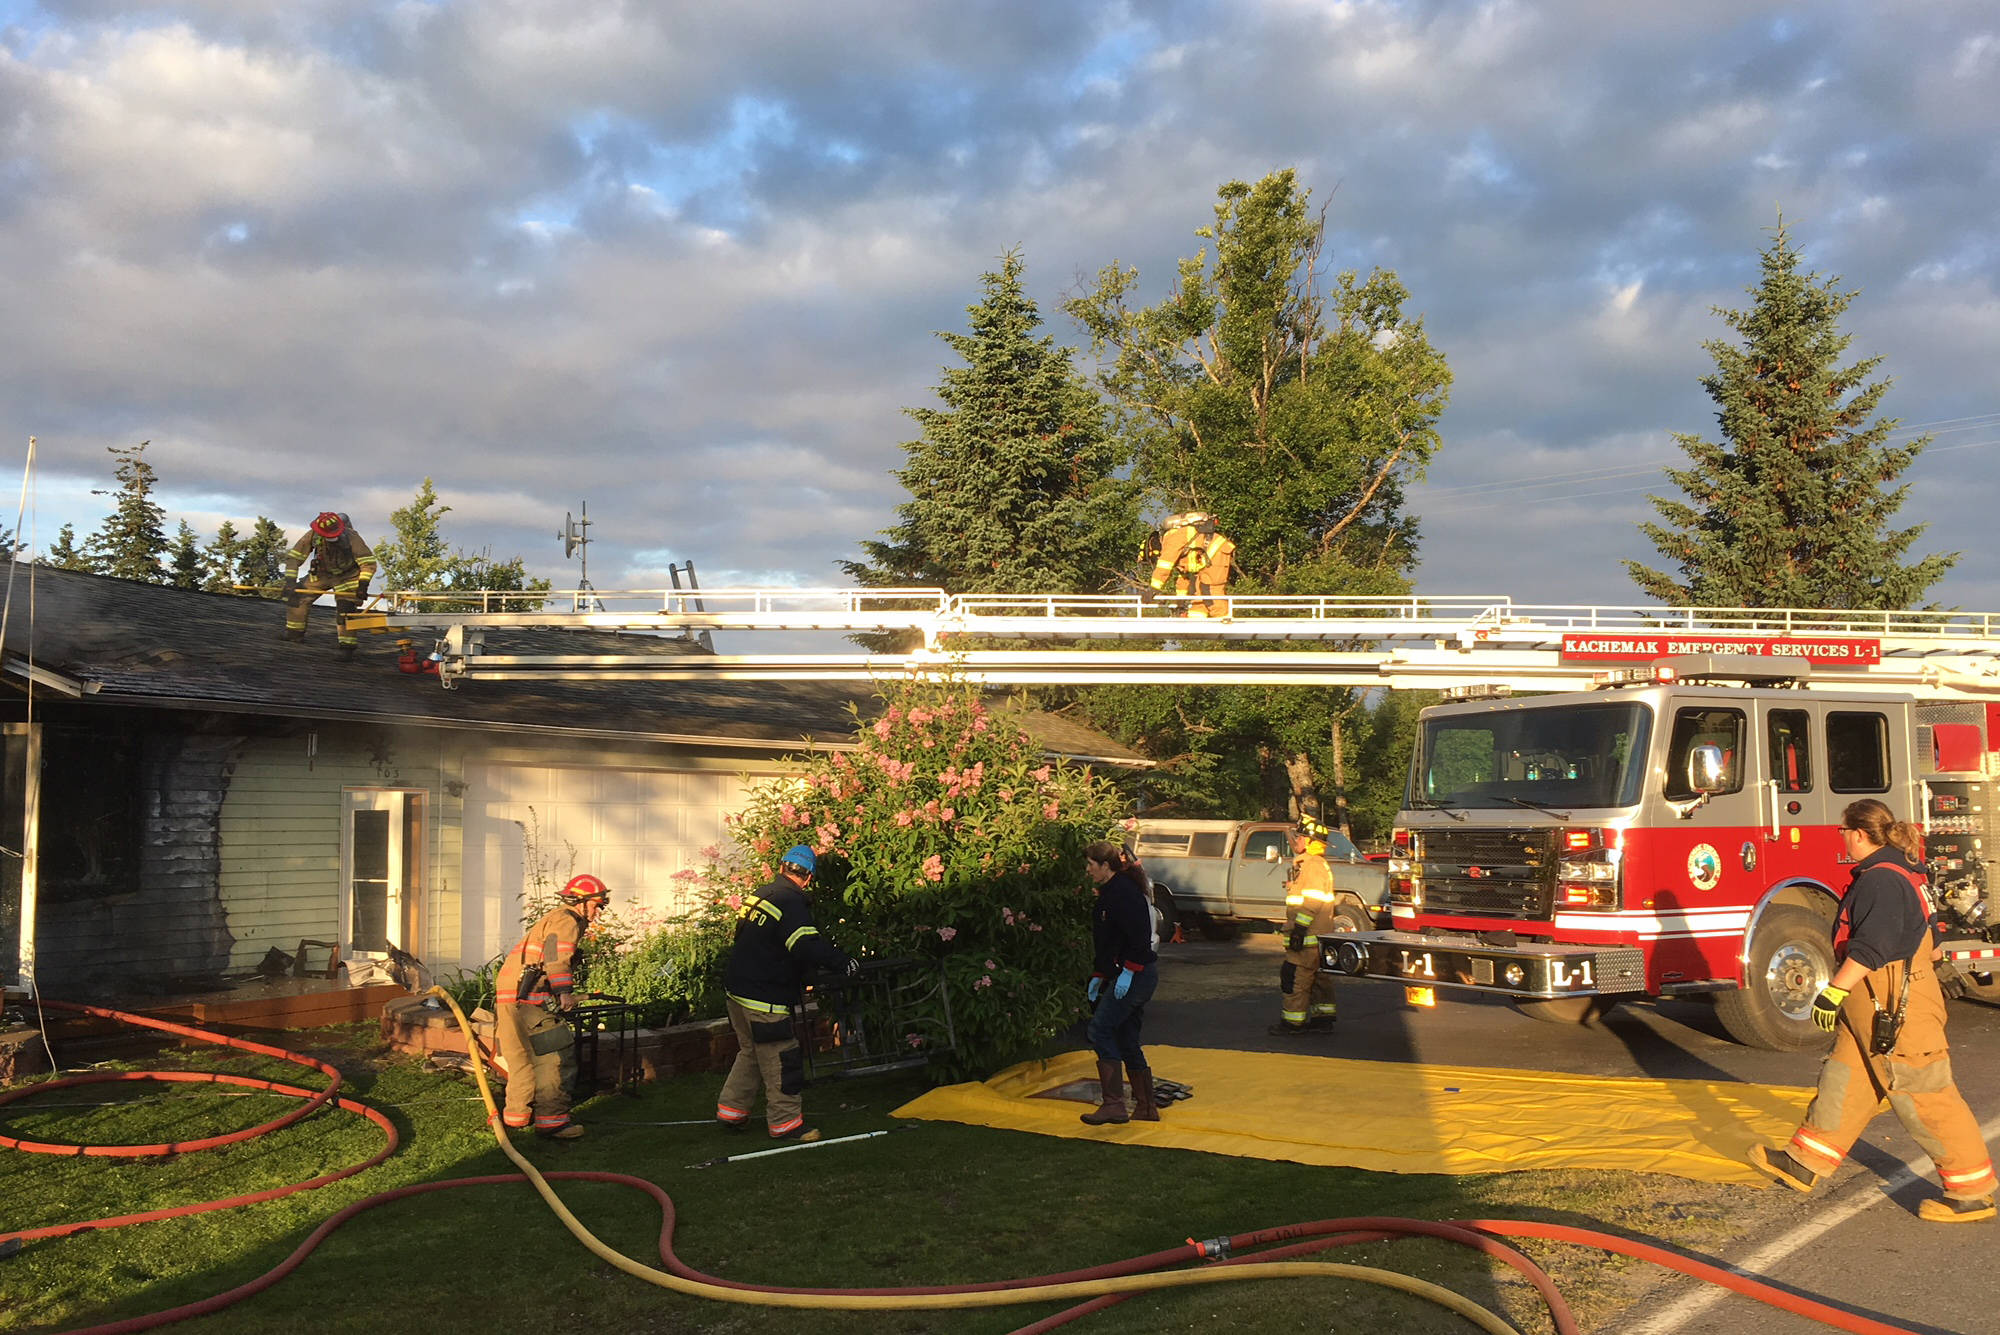 Firefighters responded on July 13, 2018, to a fire at a Danview Avenue home in Homer, Alaska. The fire badly damaged the porch and front of this home, but Homer Volunteer Fire Department and Kachemak Emergency Services firefighters kept the fire from destroying the home. (Photo provided)